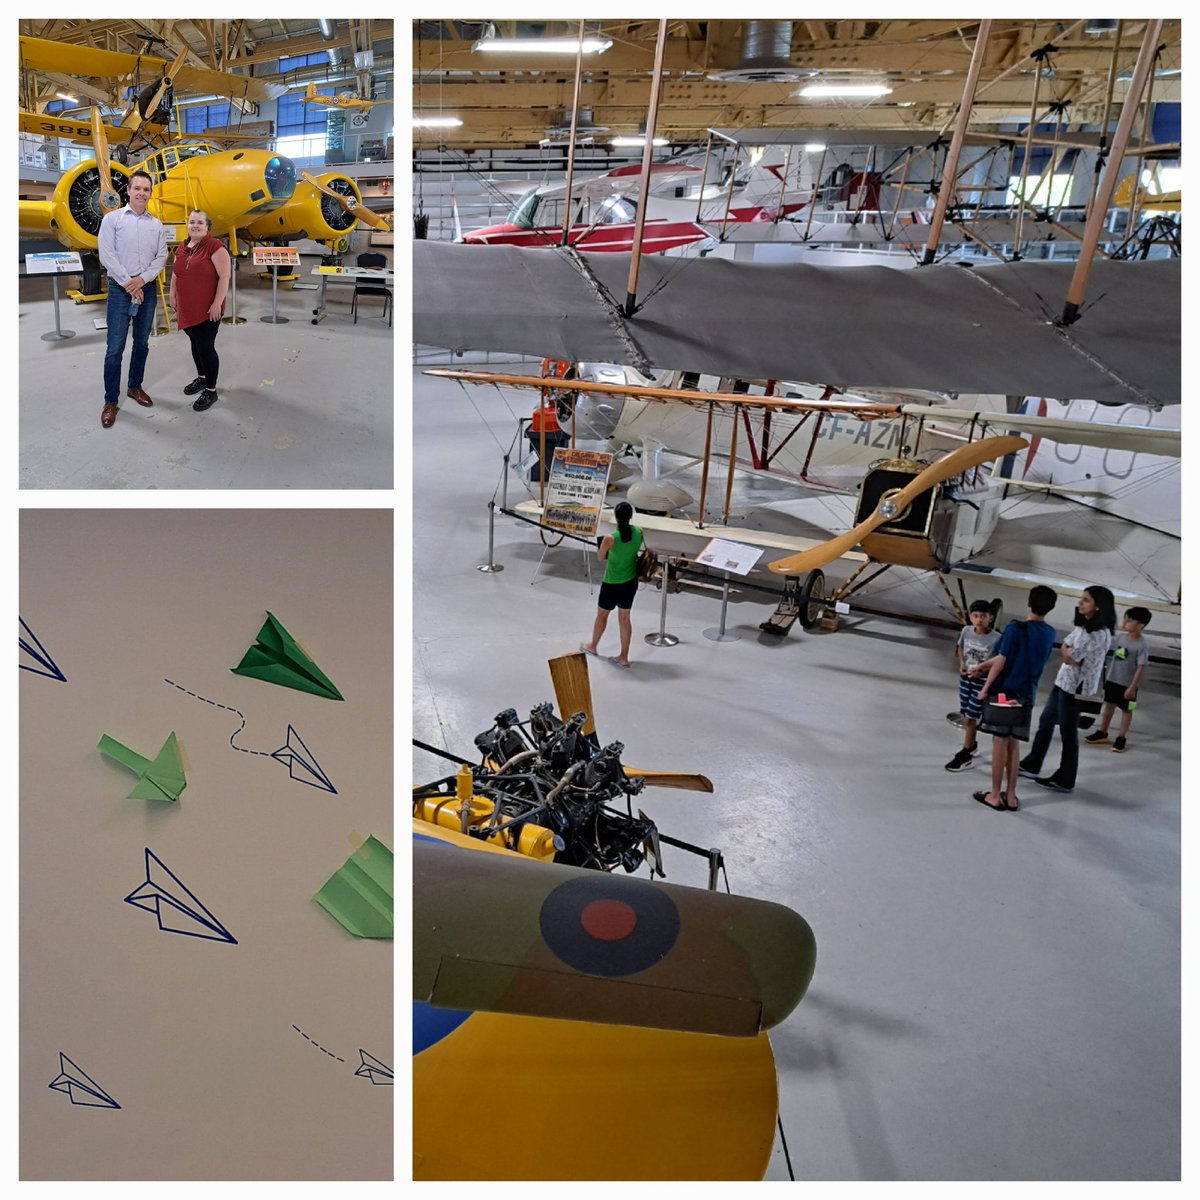 Things were busy @TheHangarMuseum yesterday during my visit, a great start to summer holidays for many folks! #meetyourmuseum @AlbertaMuseums